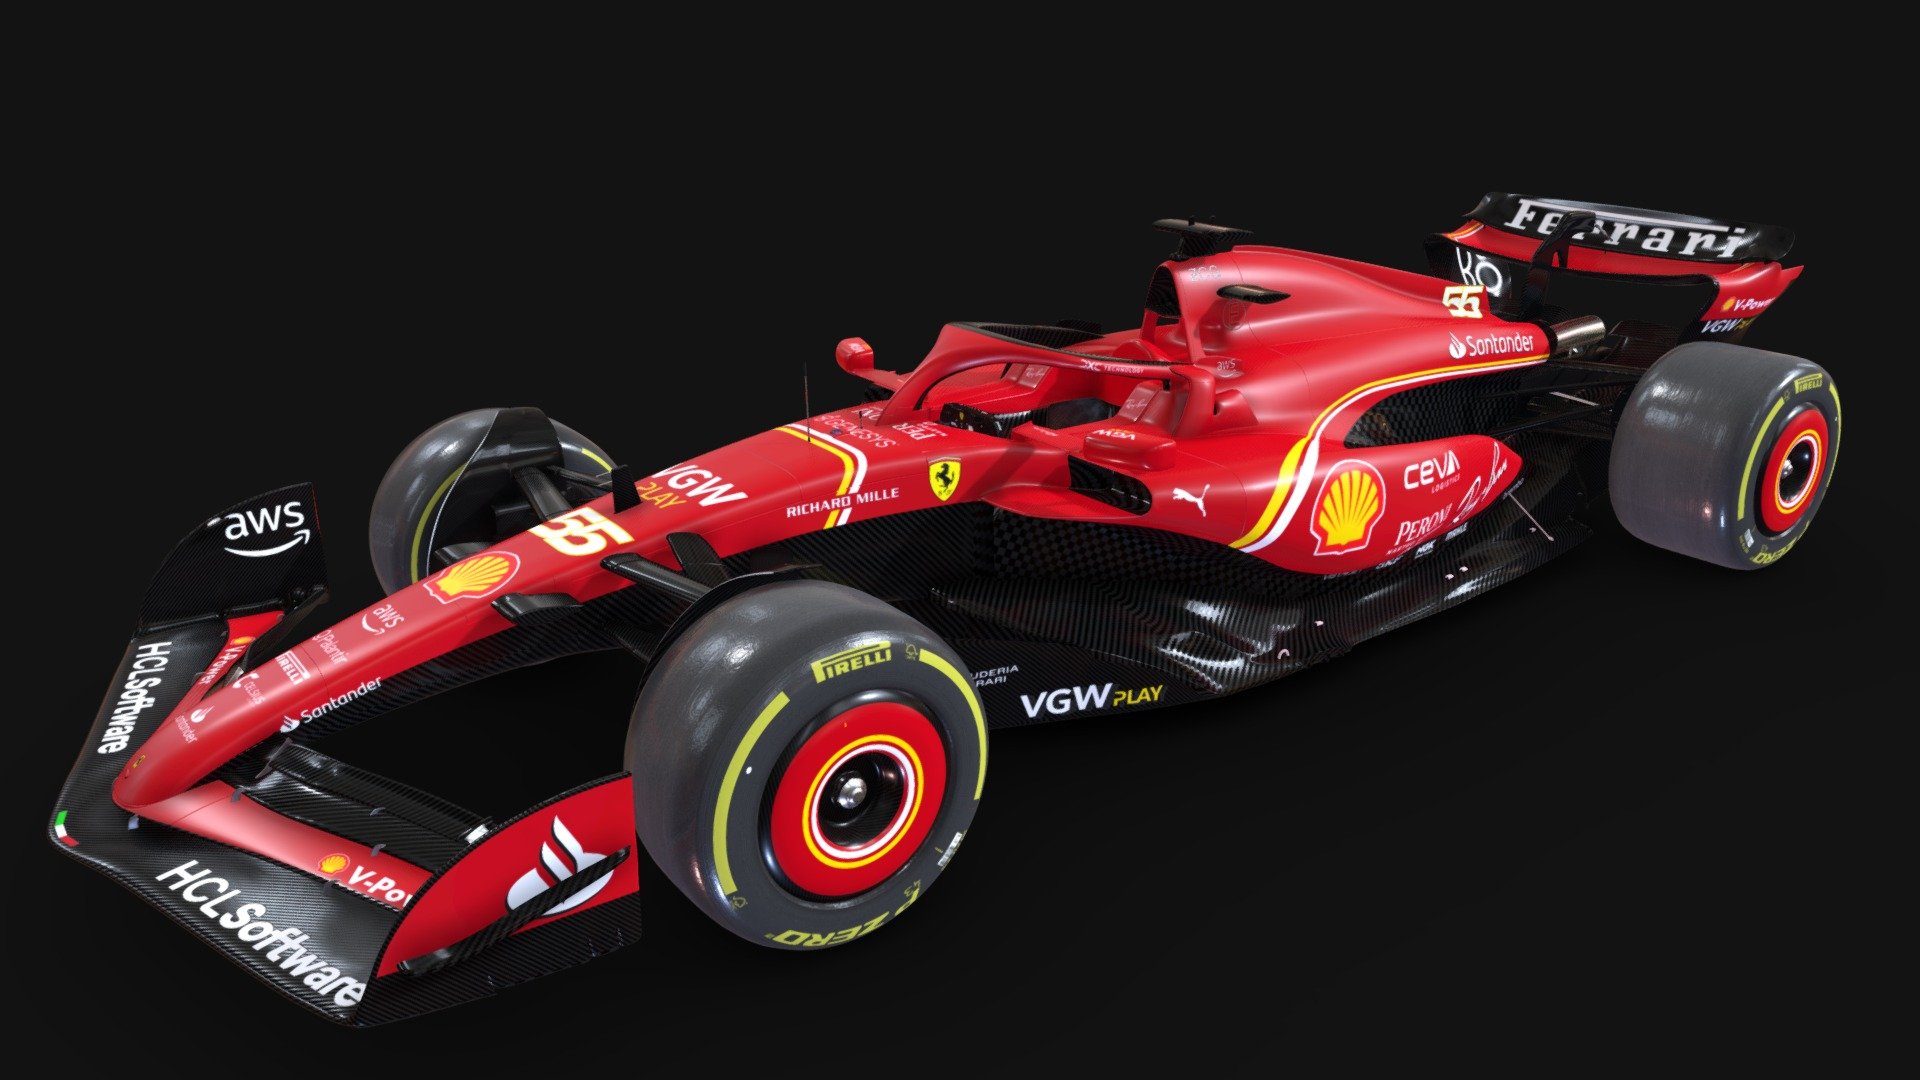 Project 212 present the first 2024 car of the collection! See more bellow

UPDATE 1.0:




NEW! - Ferrari official steering wheel 3d model

NEW! - SF-24 now have the glb. format

NEW! - now a new texture of car 55 has been added.

ADDITION - addition of some details and revision of textures

REVISION - revision of some 3d models

FEATURES:




High quality textures - 4096 x 4096

Good for renders

Good topology

UVWs non overlaping

High detailed

Interior detailed

Emissive materials

Tree tyres options: C1;C2;C3

FILE FORMATS:




FBX

BLEND

OBJ

DAE

GLB

TEXTURE FORMATS:




PSD

PNG

When you buy the model, you are able to recive all updates of the model


PLEASE, DOWNLOAD THE ATTACHED FILE - F1 Ferrari SF-24 - Buy Royalty Free 3D model by Project 212 (@P212) 3d model